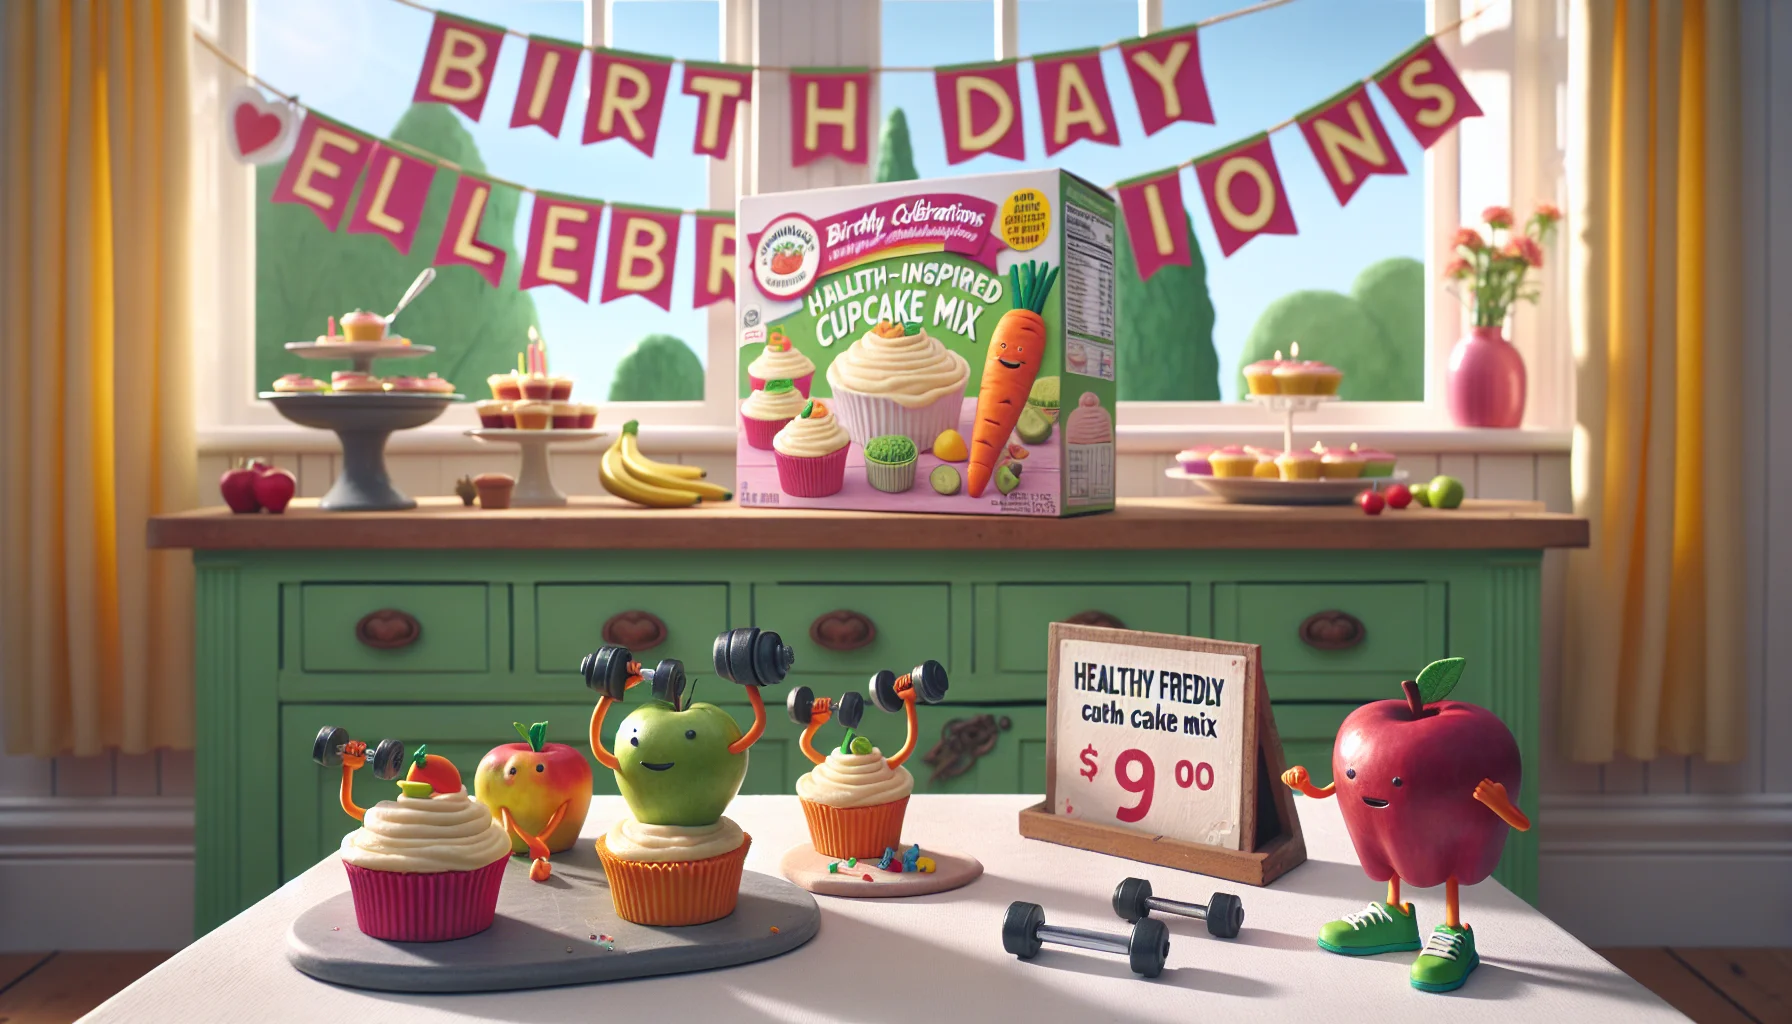 Imagine a whimsical, lighthearted scene set in a sunny kitchen, the countertop is filled with baking ingredients, prominently featuring a box of budget-friendly, health-inspired cupcake mix. A big banner reading 'Birthday Celebrations' hangs in the background. The cupcakes are unique, shaped like fruits and vegetables. There's a comic edge to the scene- a carrot-shaped cupcake is lifting mini dumbbells, an apple-shaped cupcake is wearing running shoes, signifying the healthy options for the cake mix. A price tag next to the cupcake mix box shows surprising affordability, enticing the viewers to choose healthier eating options without burning their pockets.